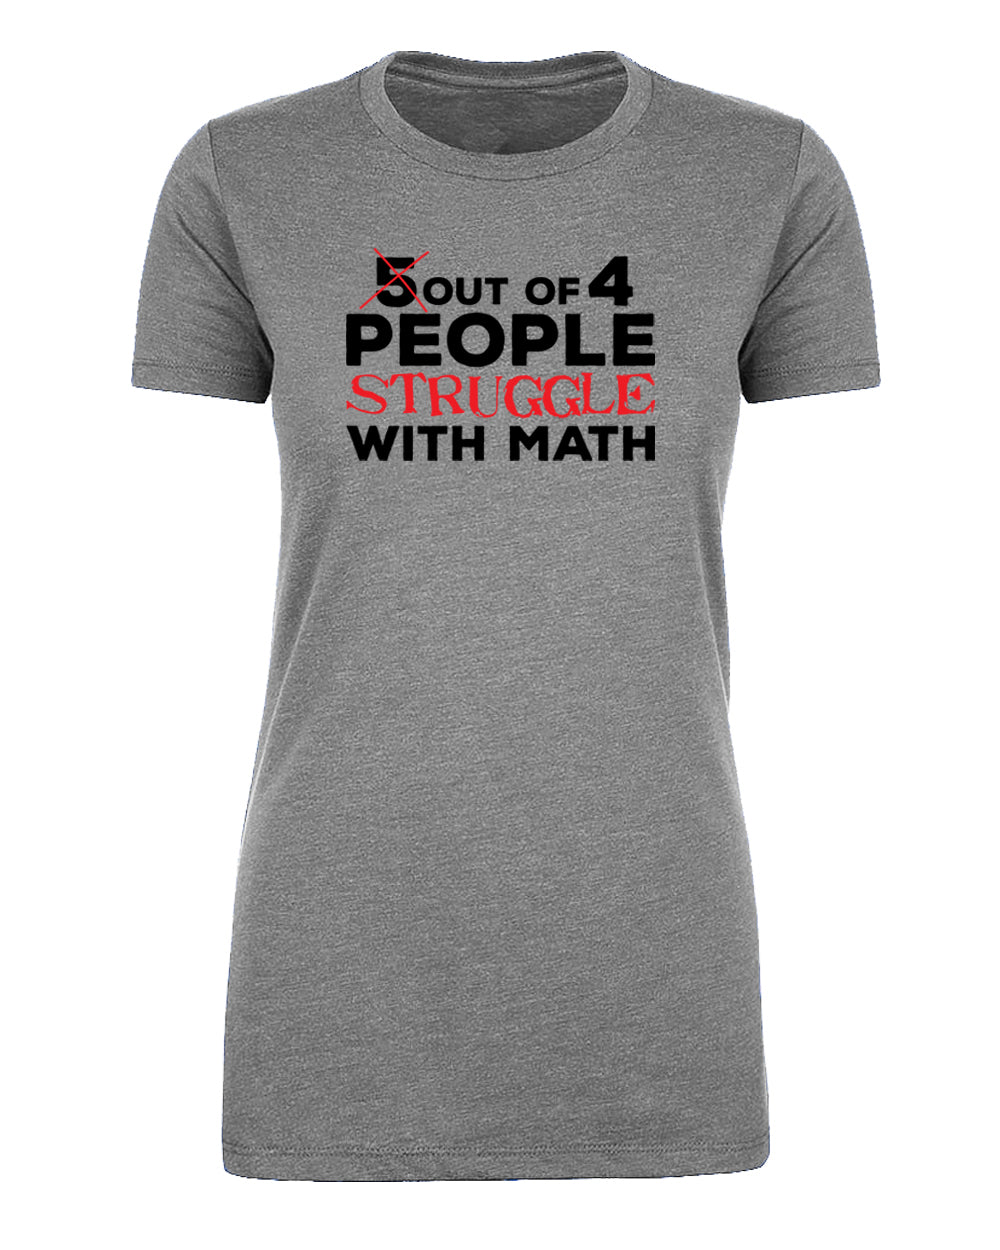 5 Out of 4 People Struggle With Math Womens T Shirts - Mato & Hash